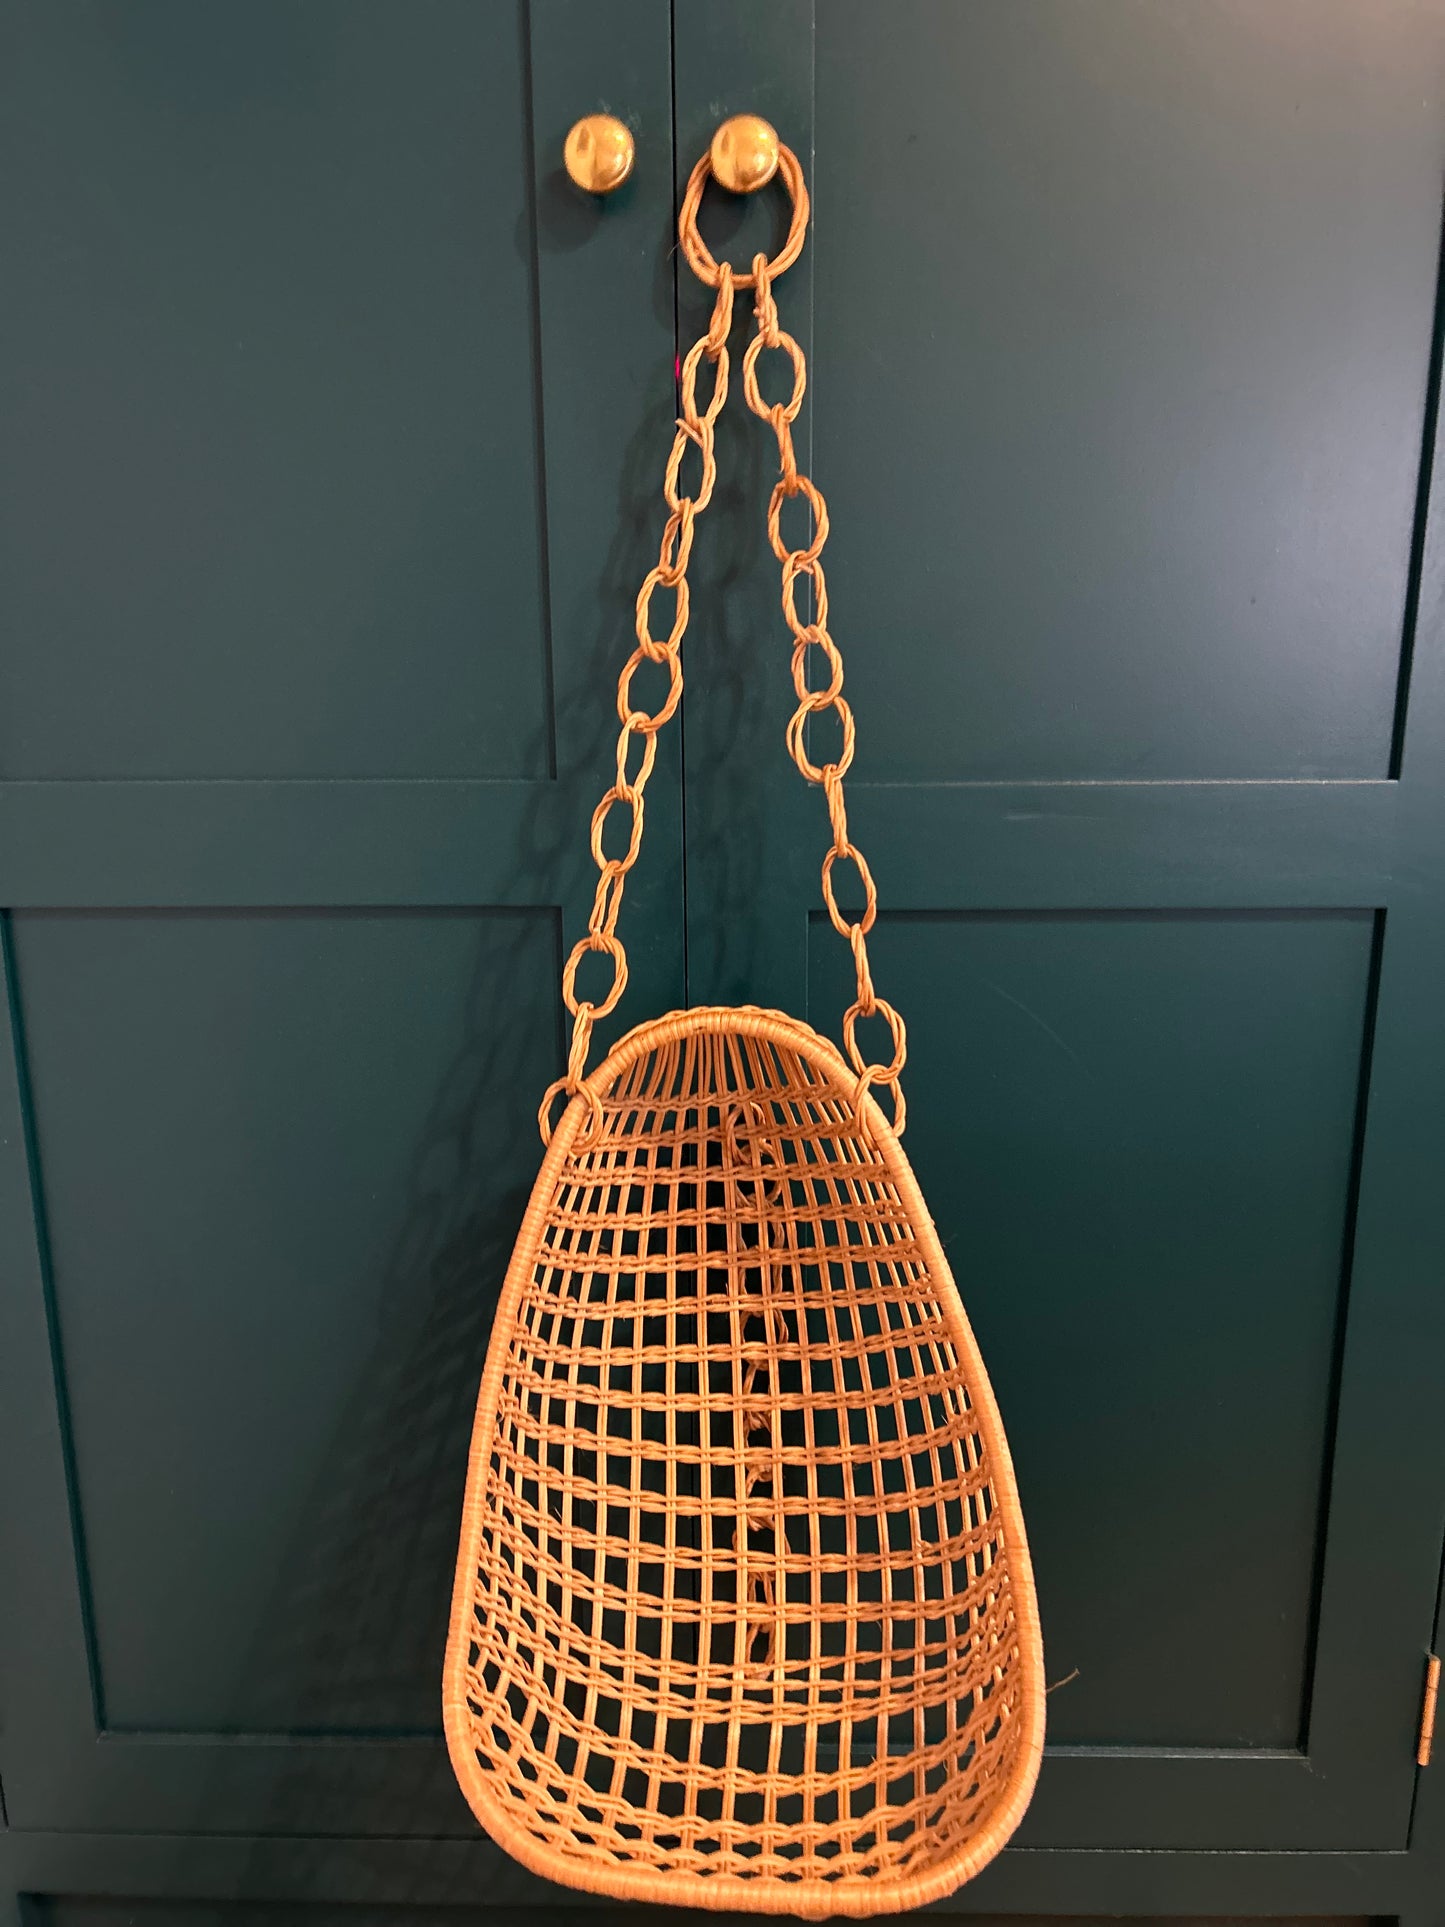 Wicker Childs Toy Swing Chair